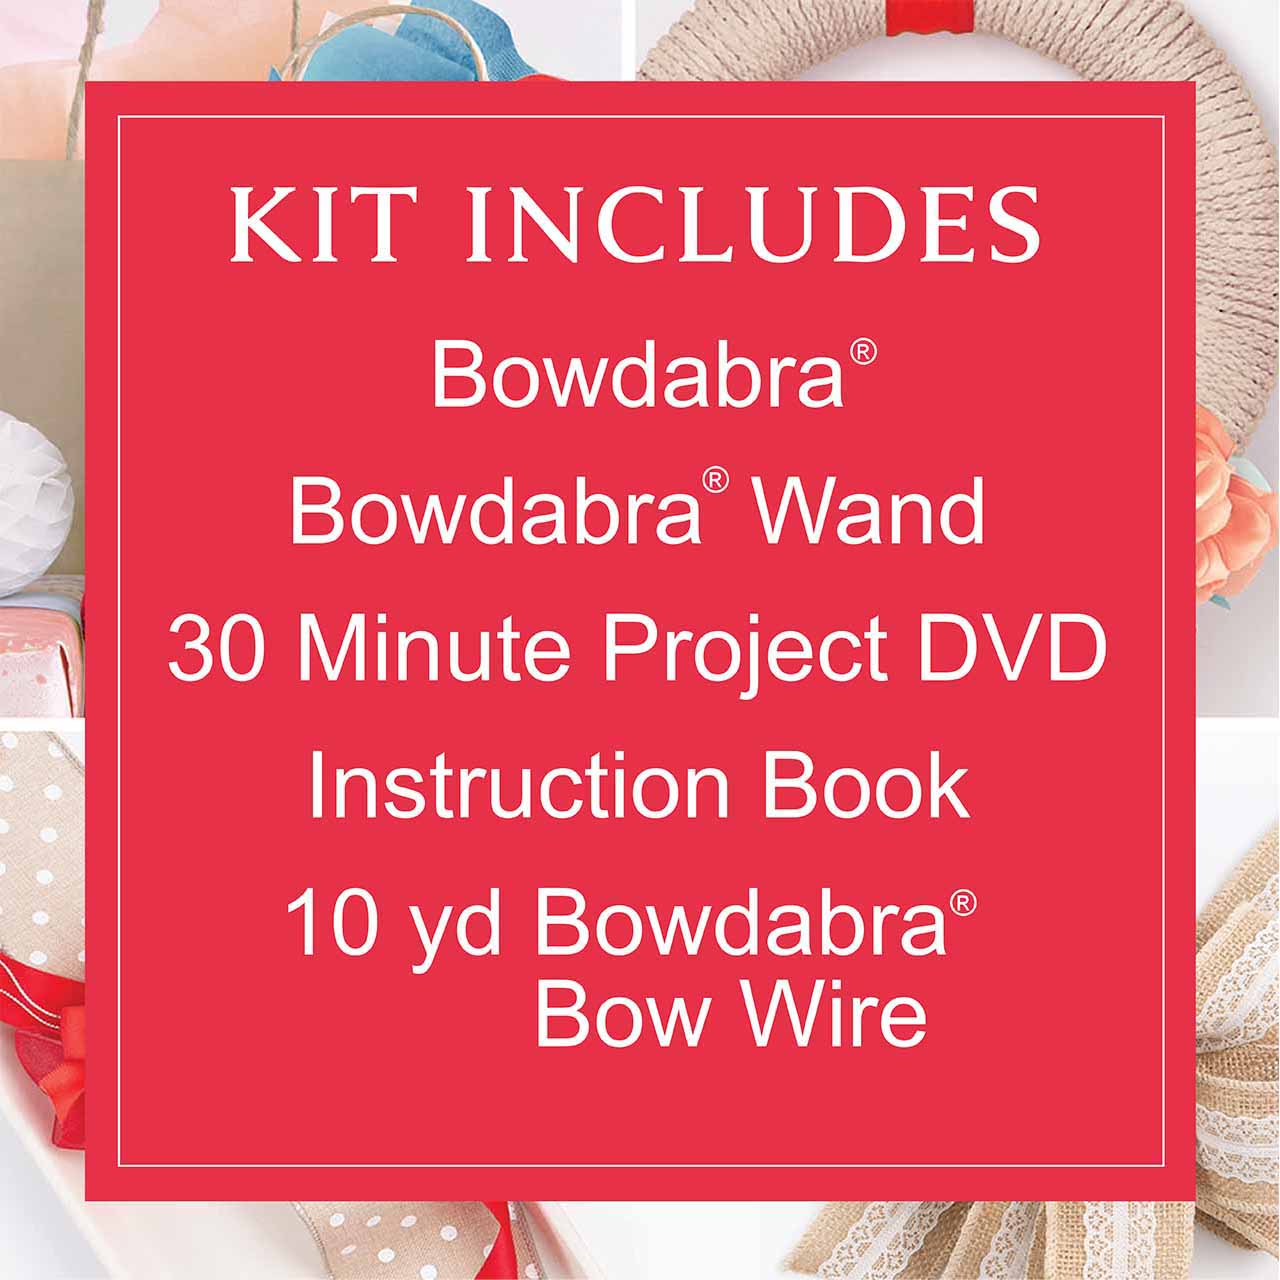  Bowdabra Designer Bow Maker Kit, Large Bundle with 100yd Gold  Bow Wire for Creating Gift Bows, Swags, Decorations, Hair Bows, Party  Favors, Corsages : Health & Household